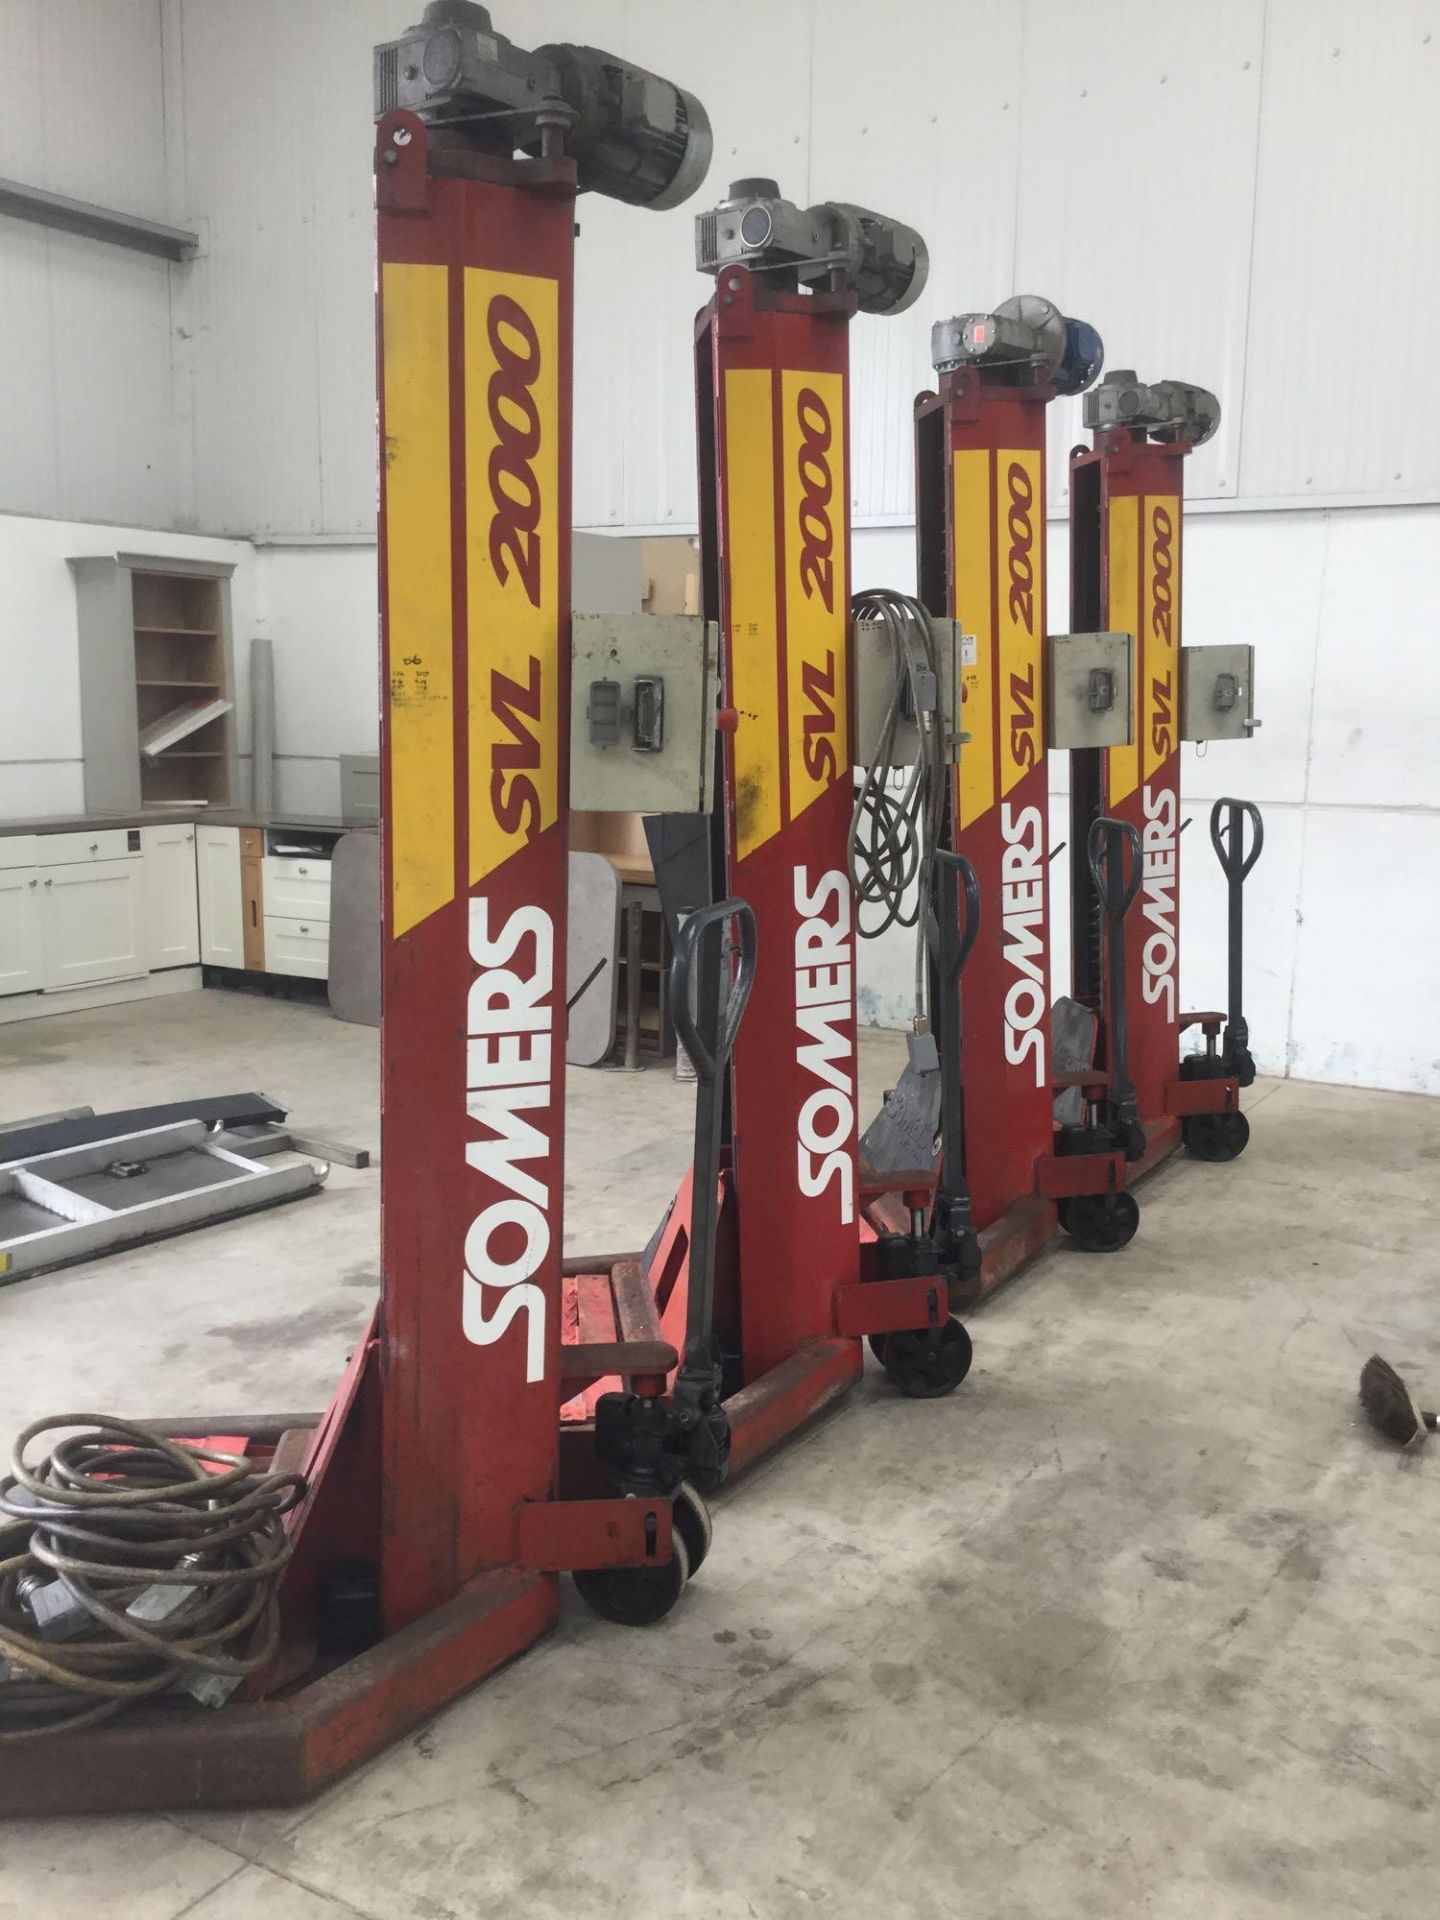 Somers svl 2000 mobile vehicle lift and axle stands - Image 12 of 16